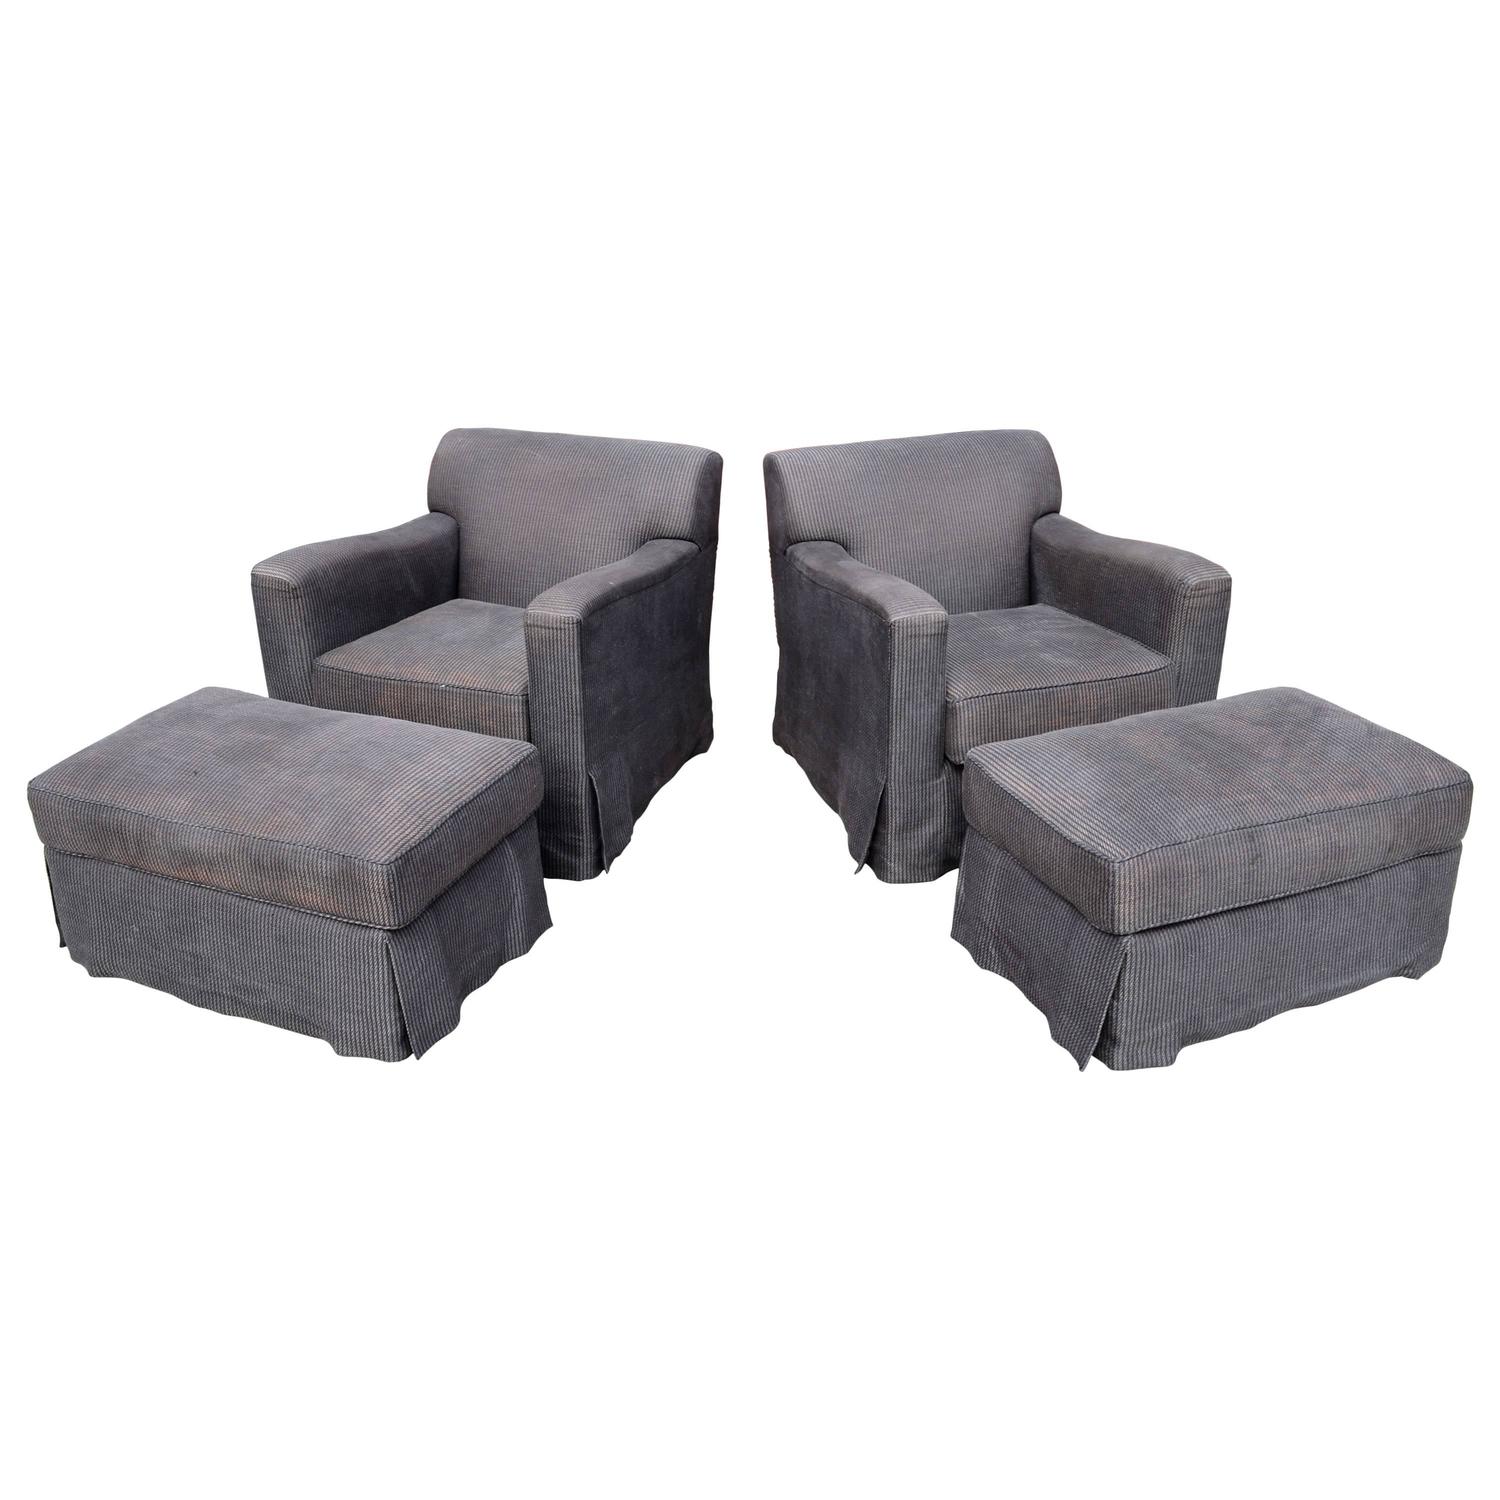 Christian Liaigre lounge chairs with ottomans, 1997